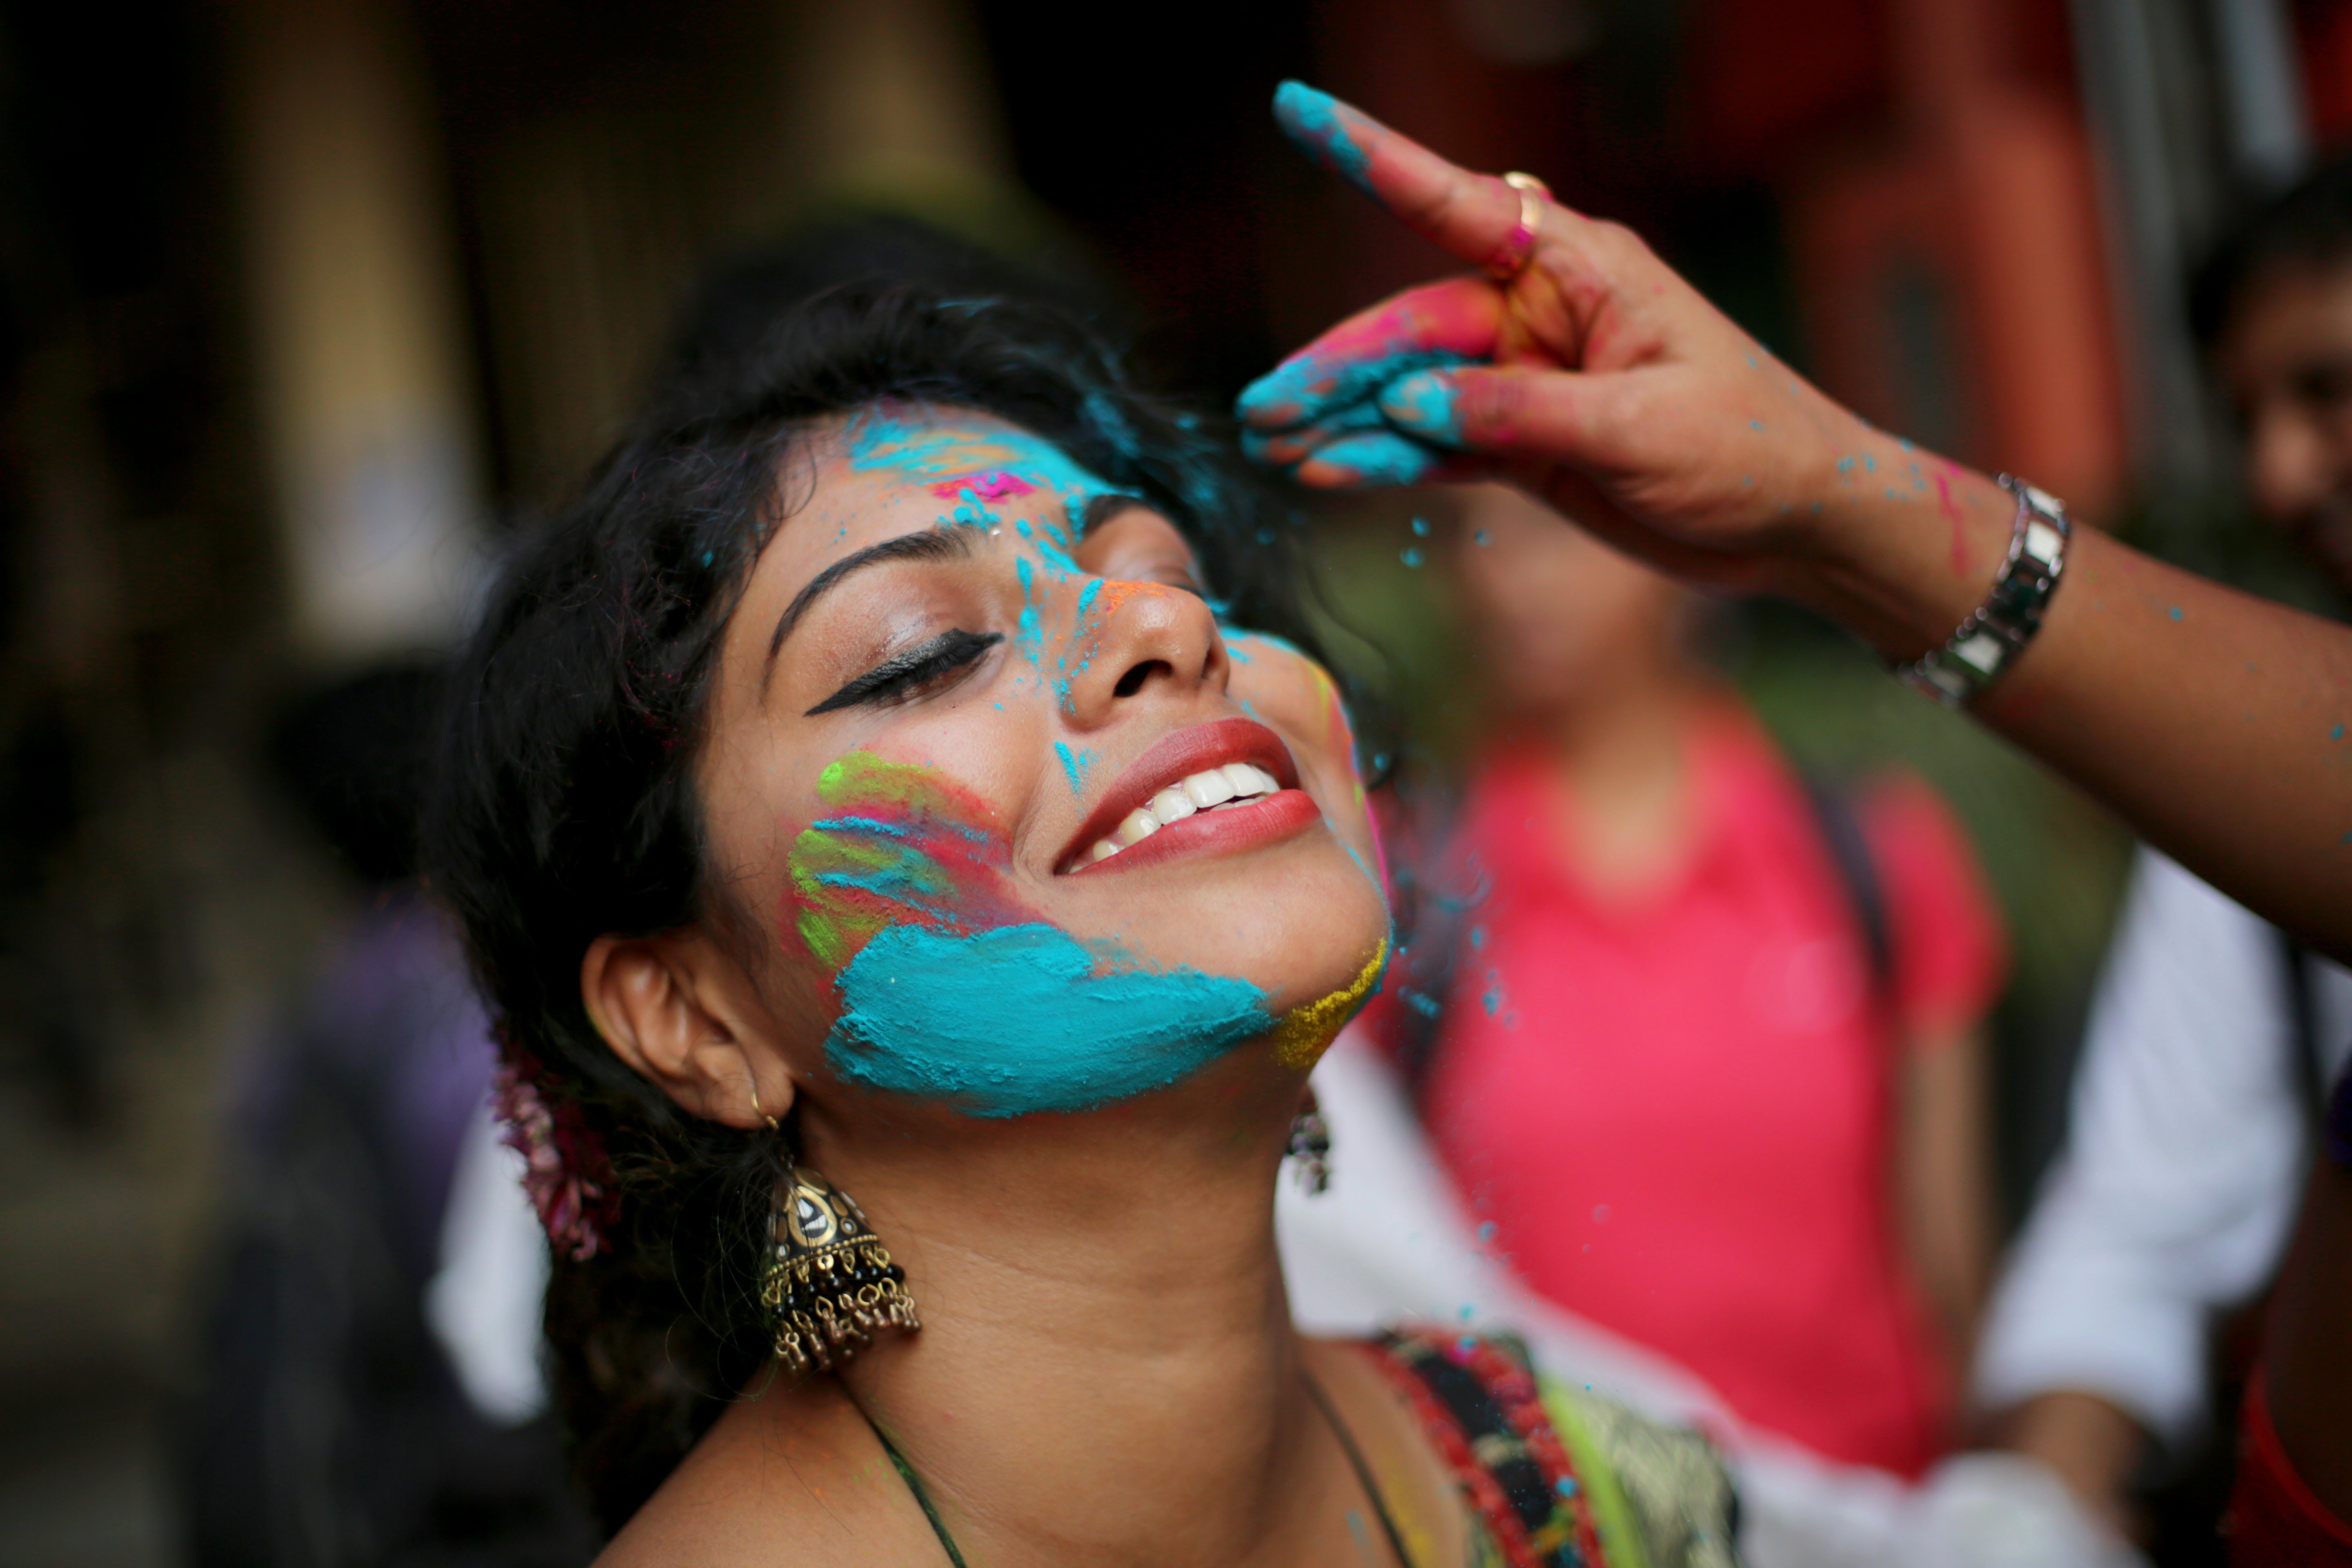 Paint Throwing And Dancing At India's Holi Festival